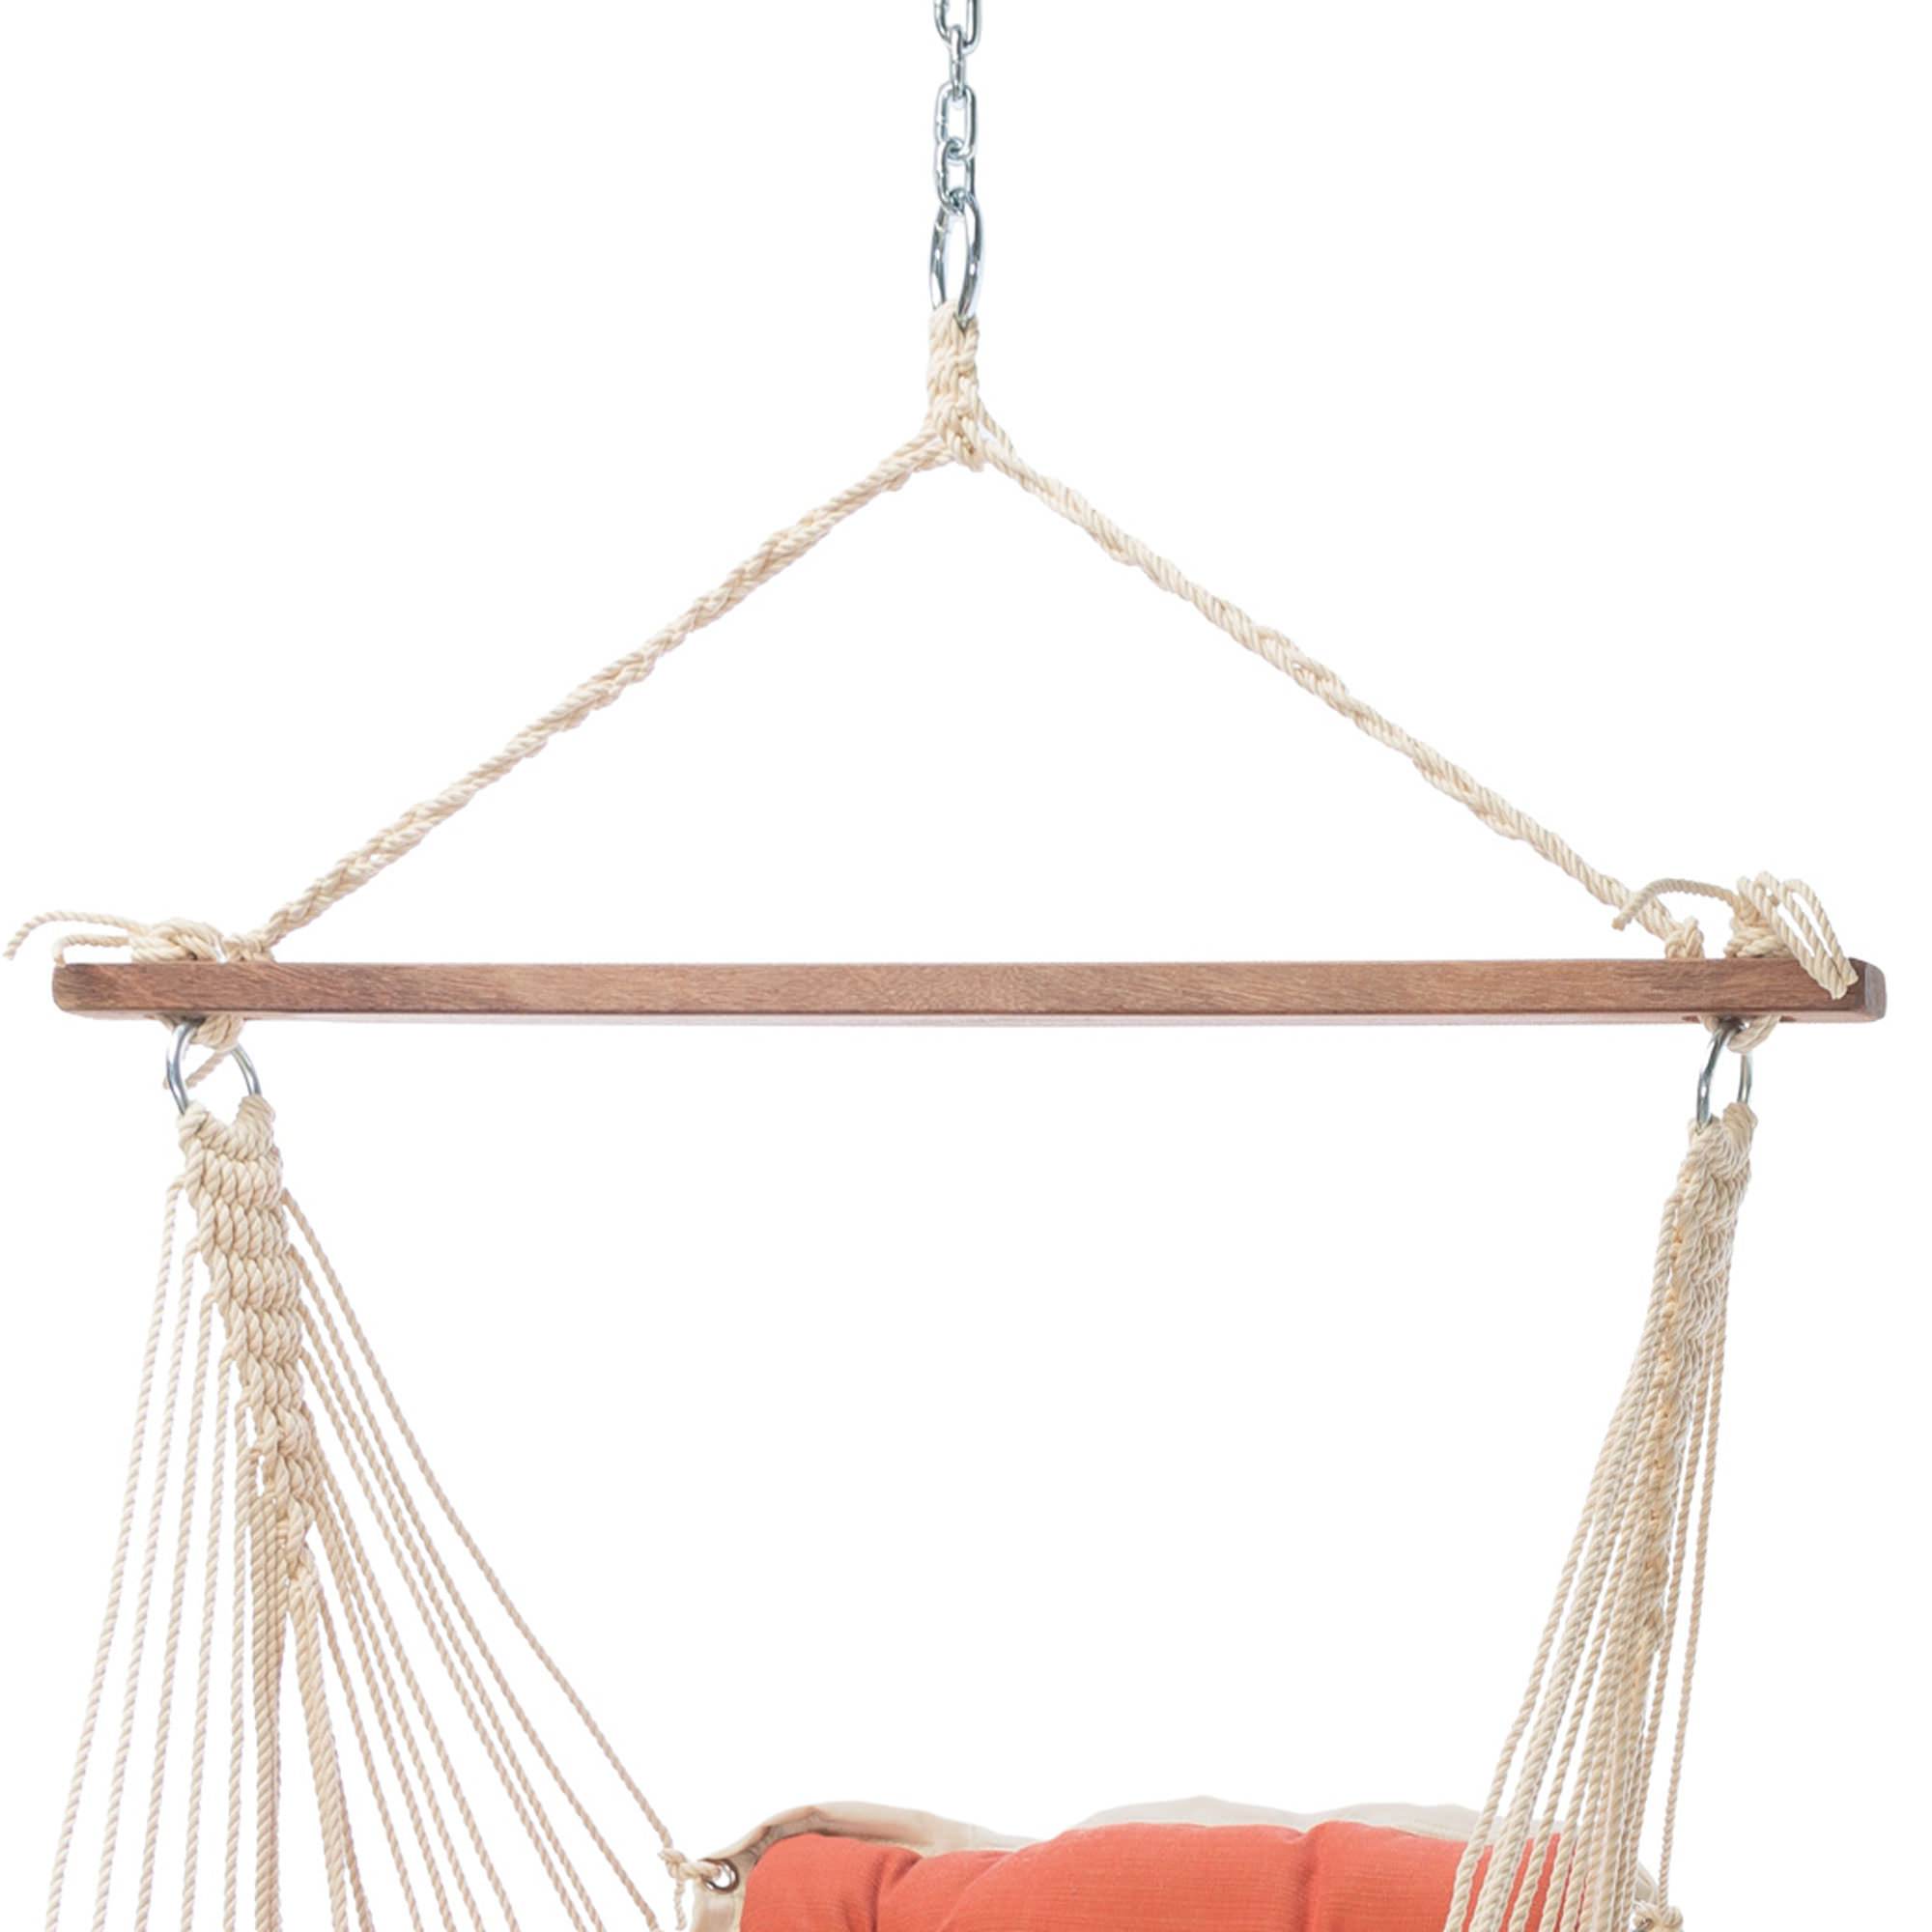 Replacement Cumaru Spreader Bar for Tufted Single Swing | Hatteras 